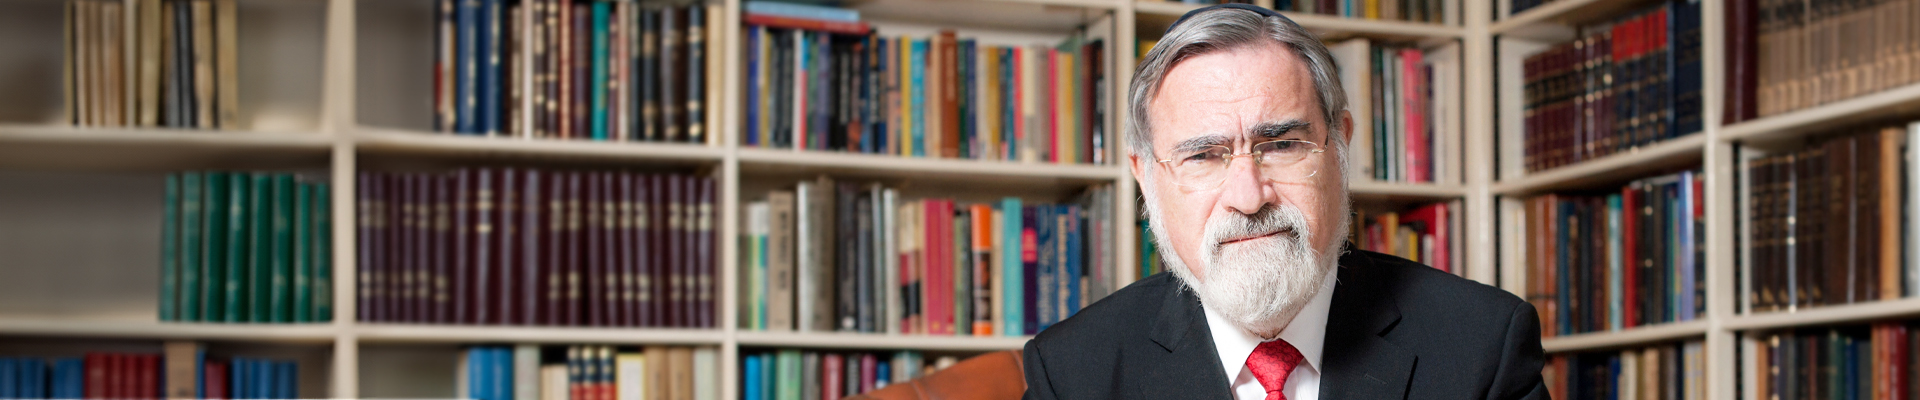 Rabbi Lord Jonathan Sacks’ Personal Archive Arrives at the National Library of Israel